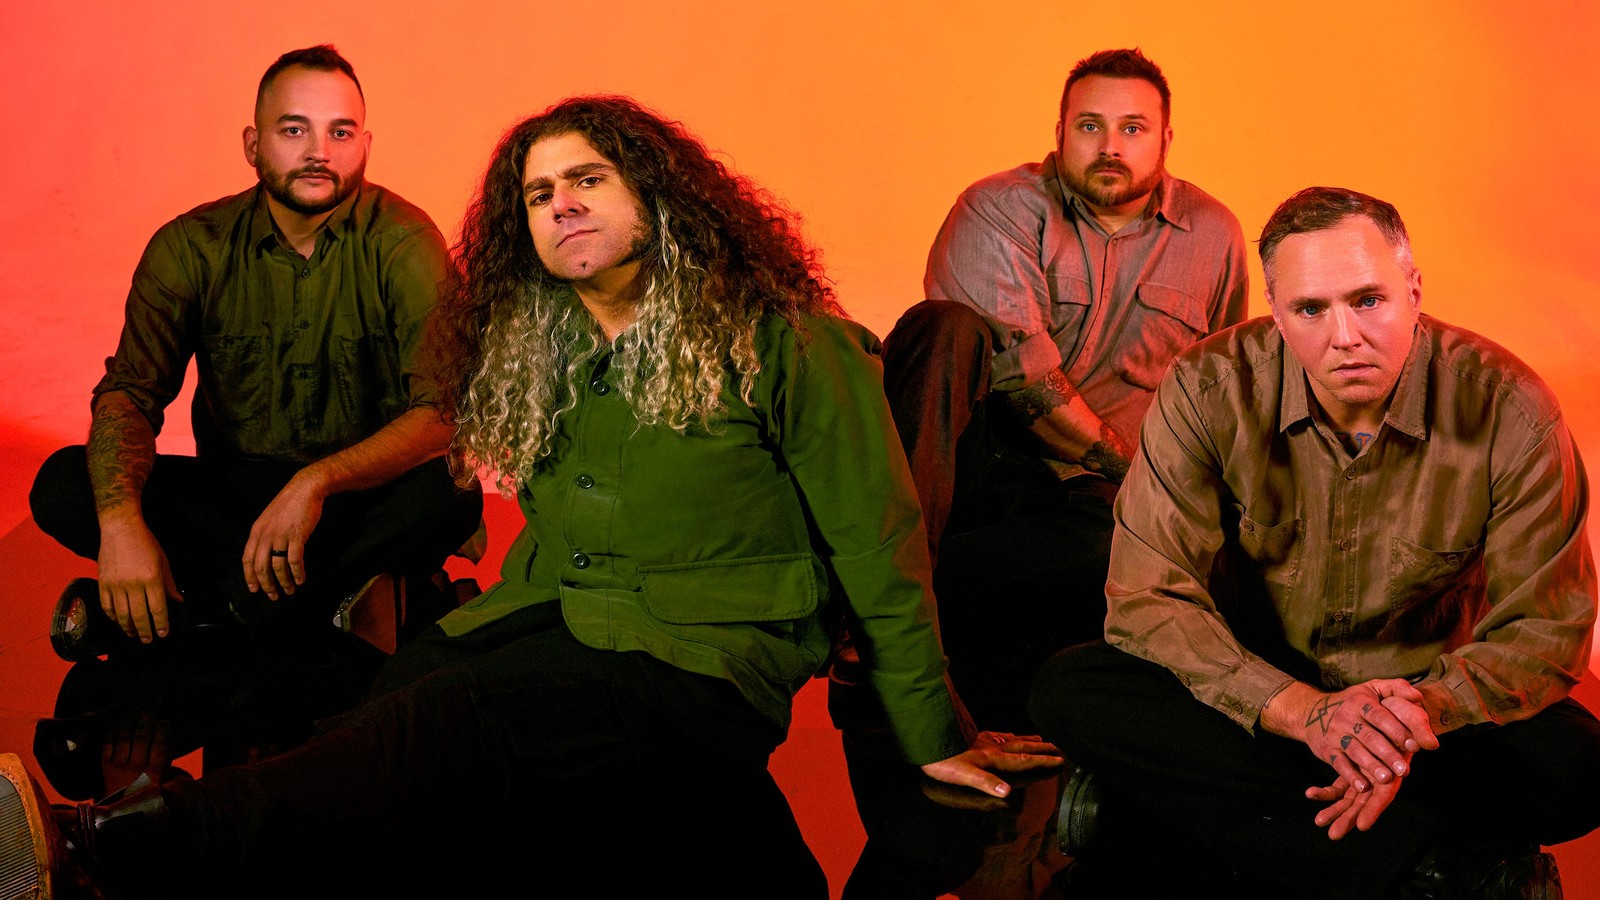 coheed and cambria on tour